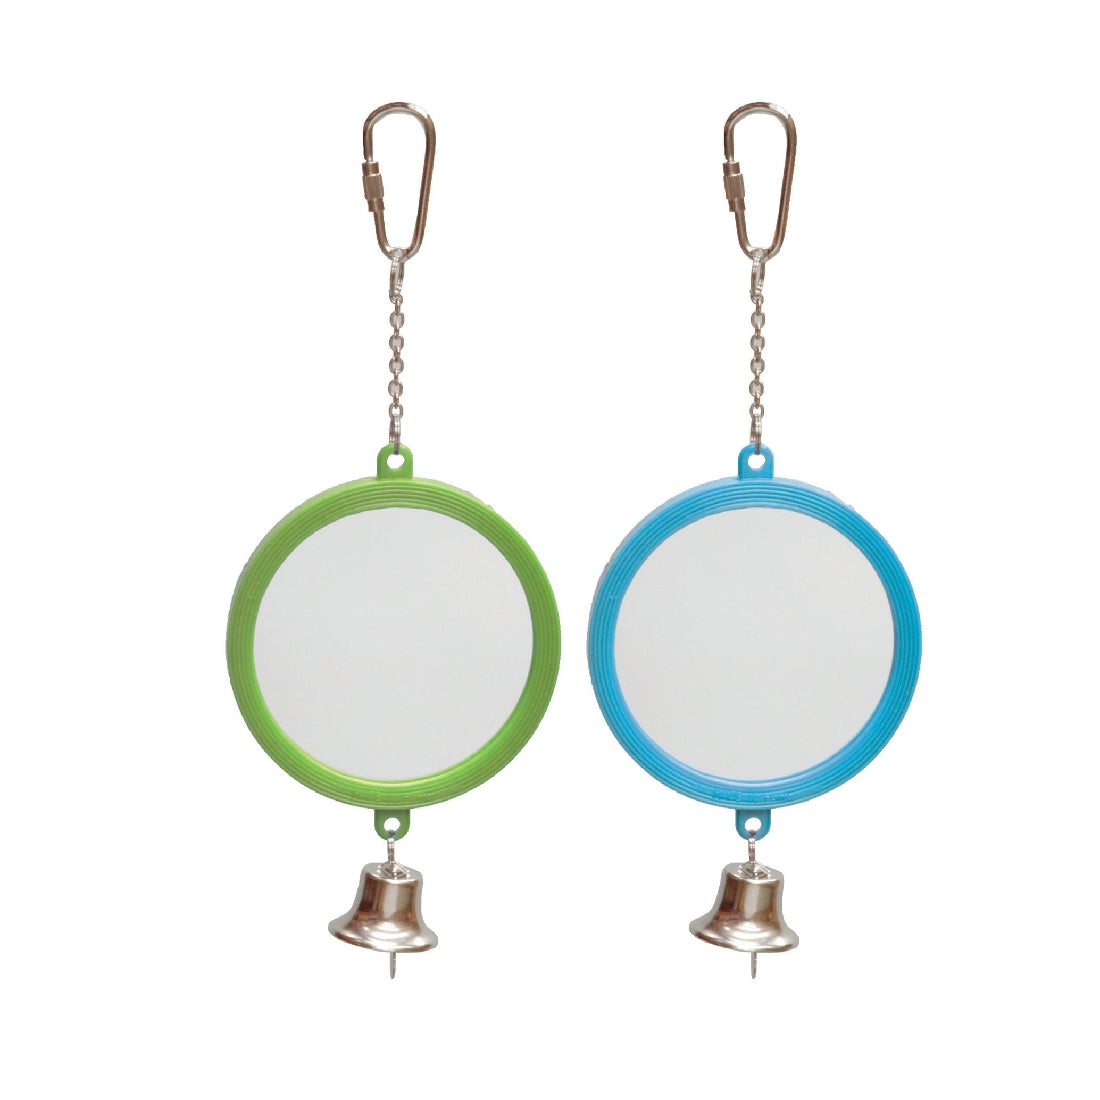 Two round bird toys with mirrors, green and blue, with bells.